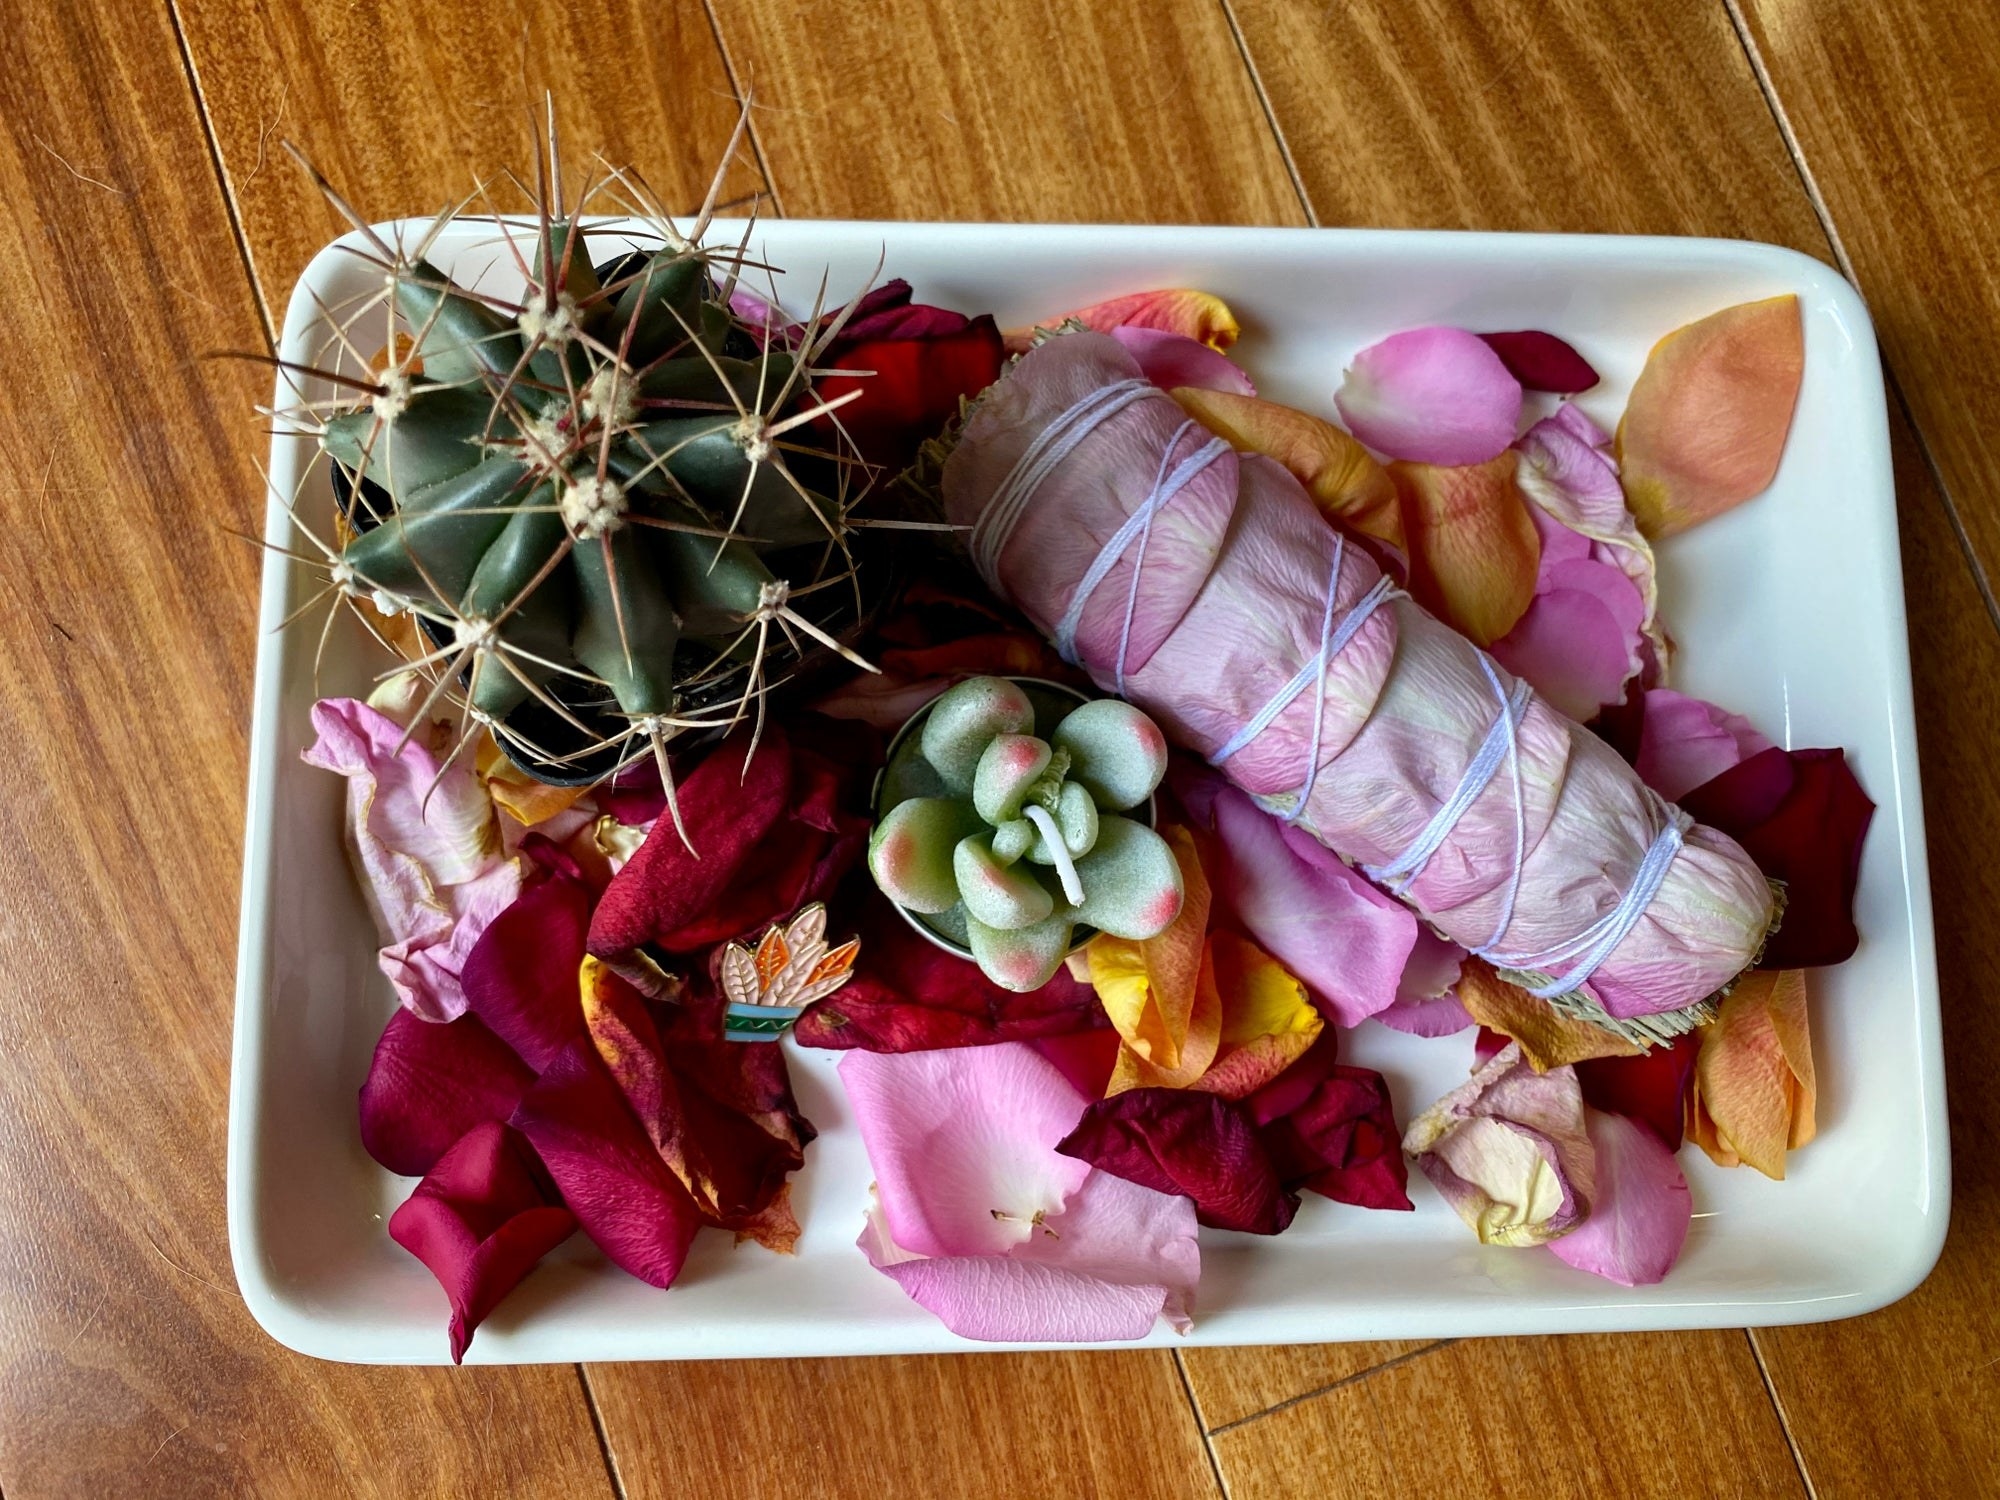 cactus, succulent candle, smudging kit styled in dish with rose petals